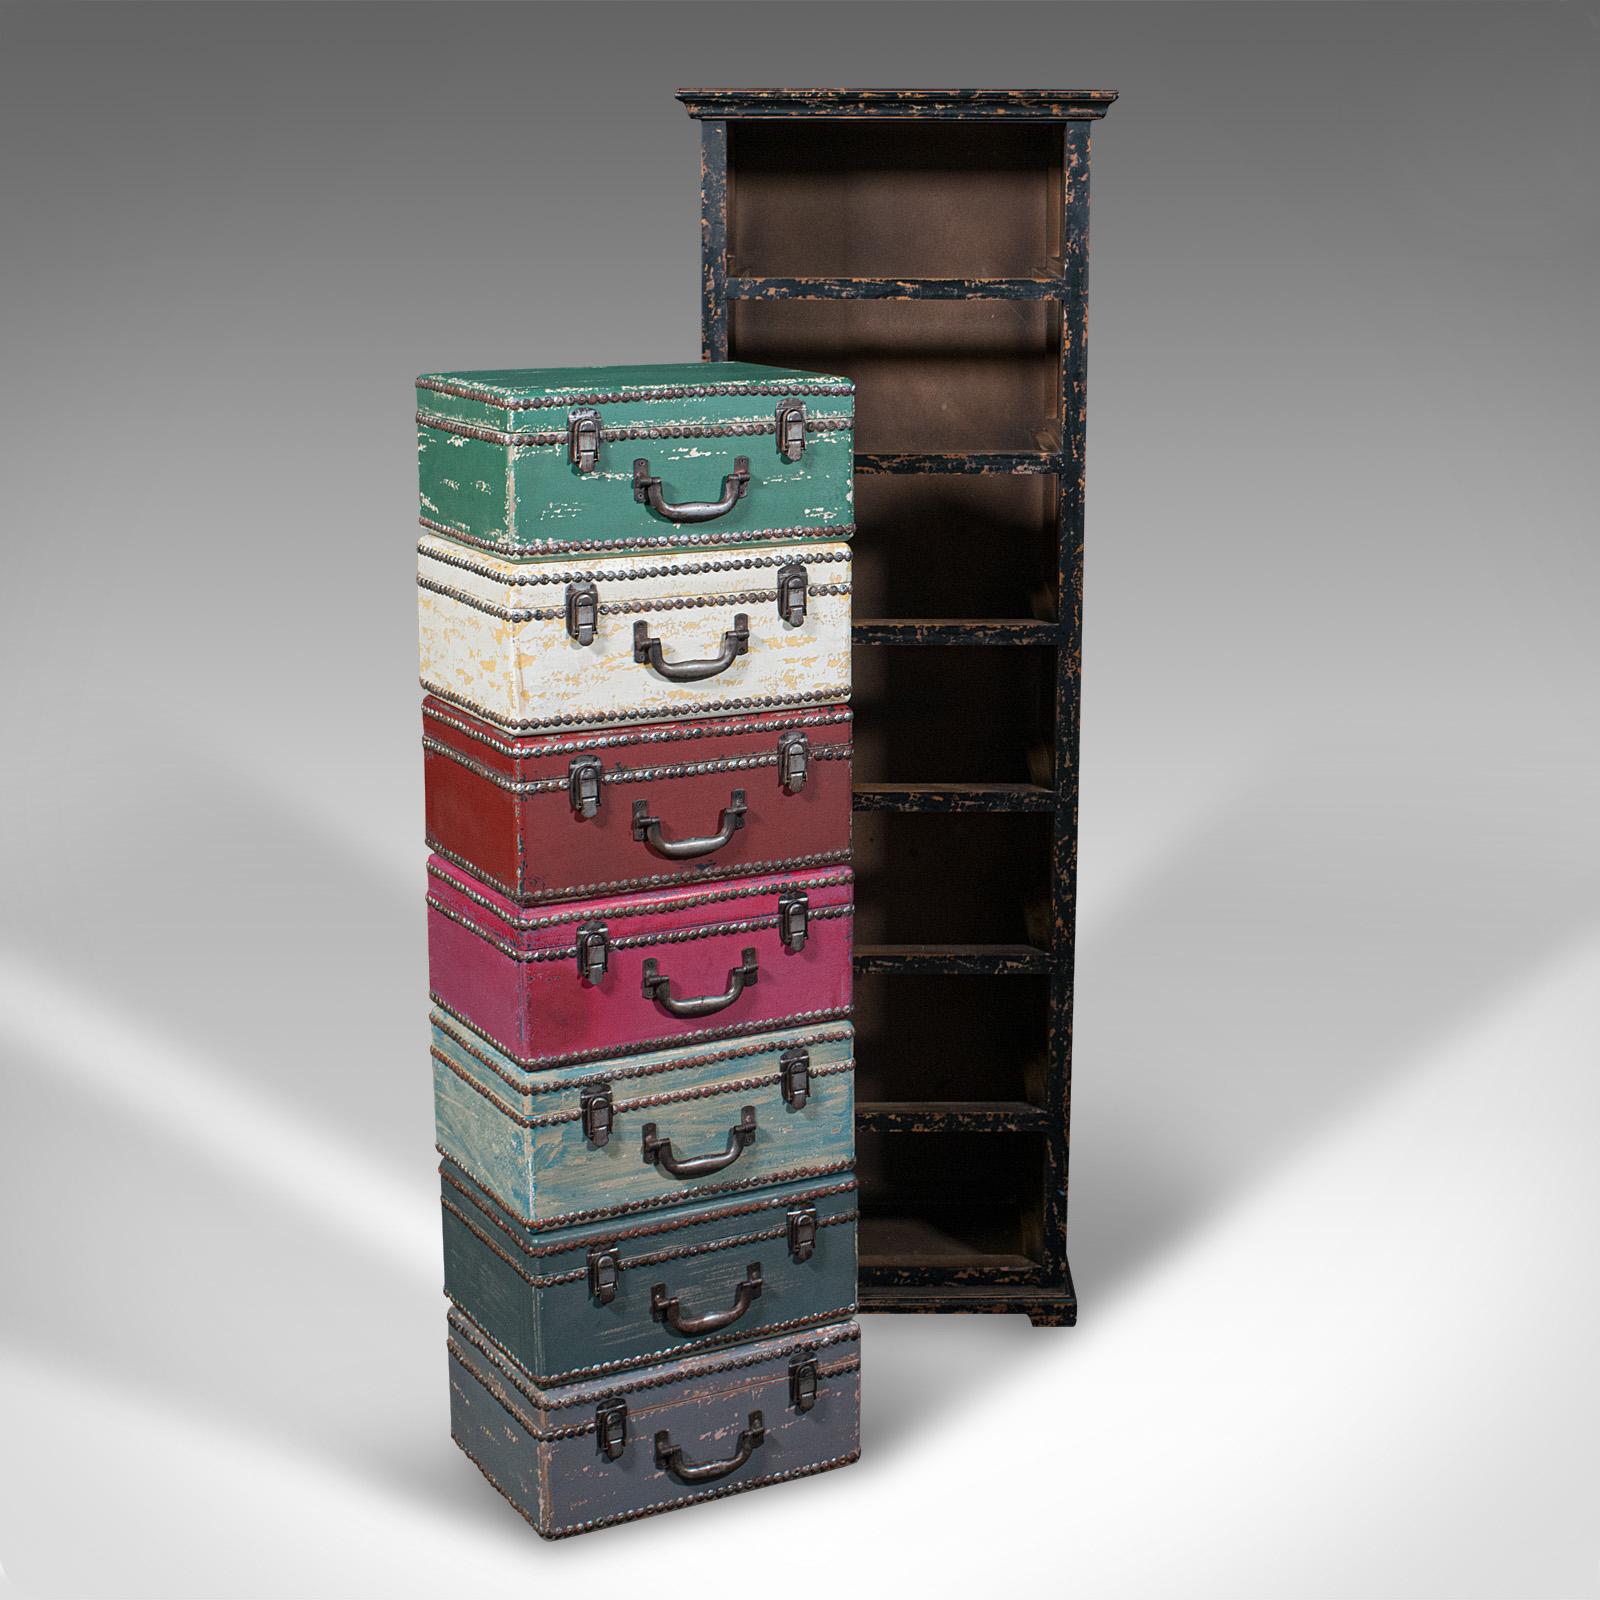 This is a tall vintage trunk stand. An English, hand-painted pine suitcase chest of drawers, dating to the late 20th century, circa 1980.

Full of character and a practical storage solution
Displays a desirable aged patina